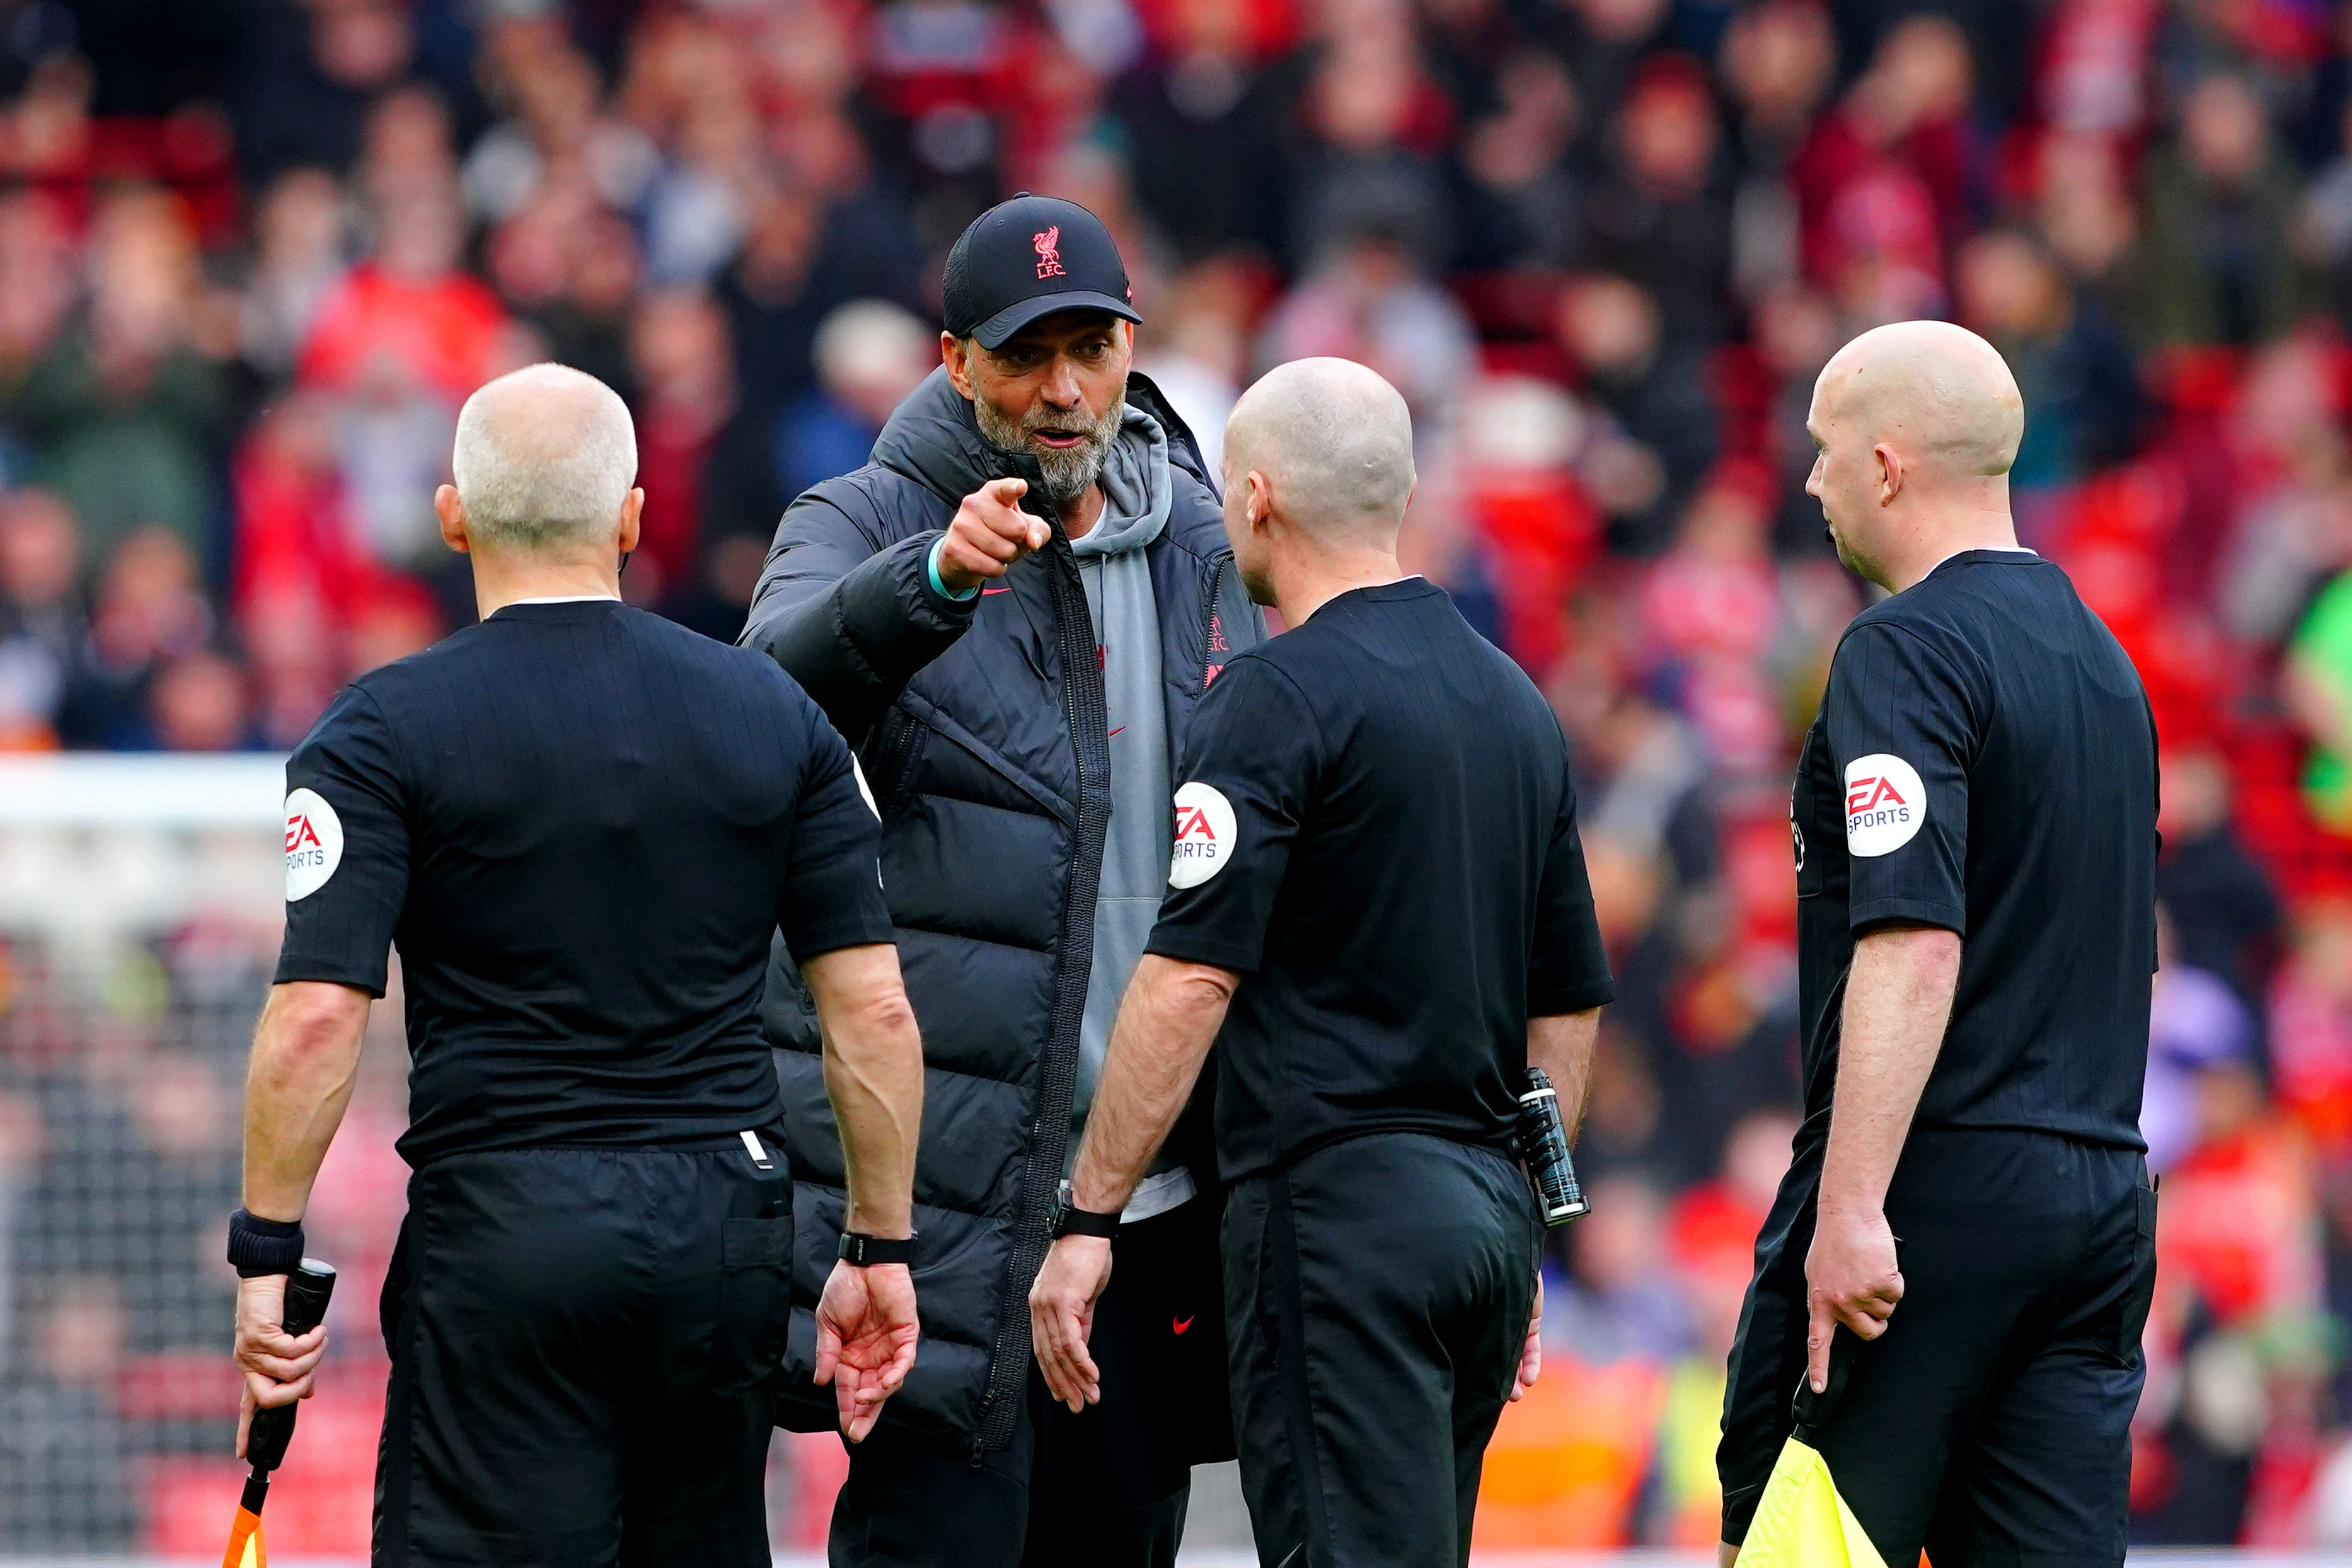 FA charges Klopp for inappropriate behavior towards referee Tierney